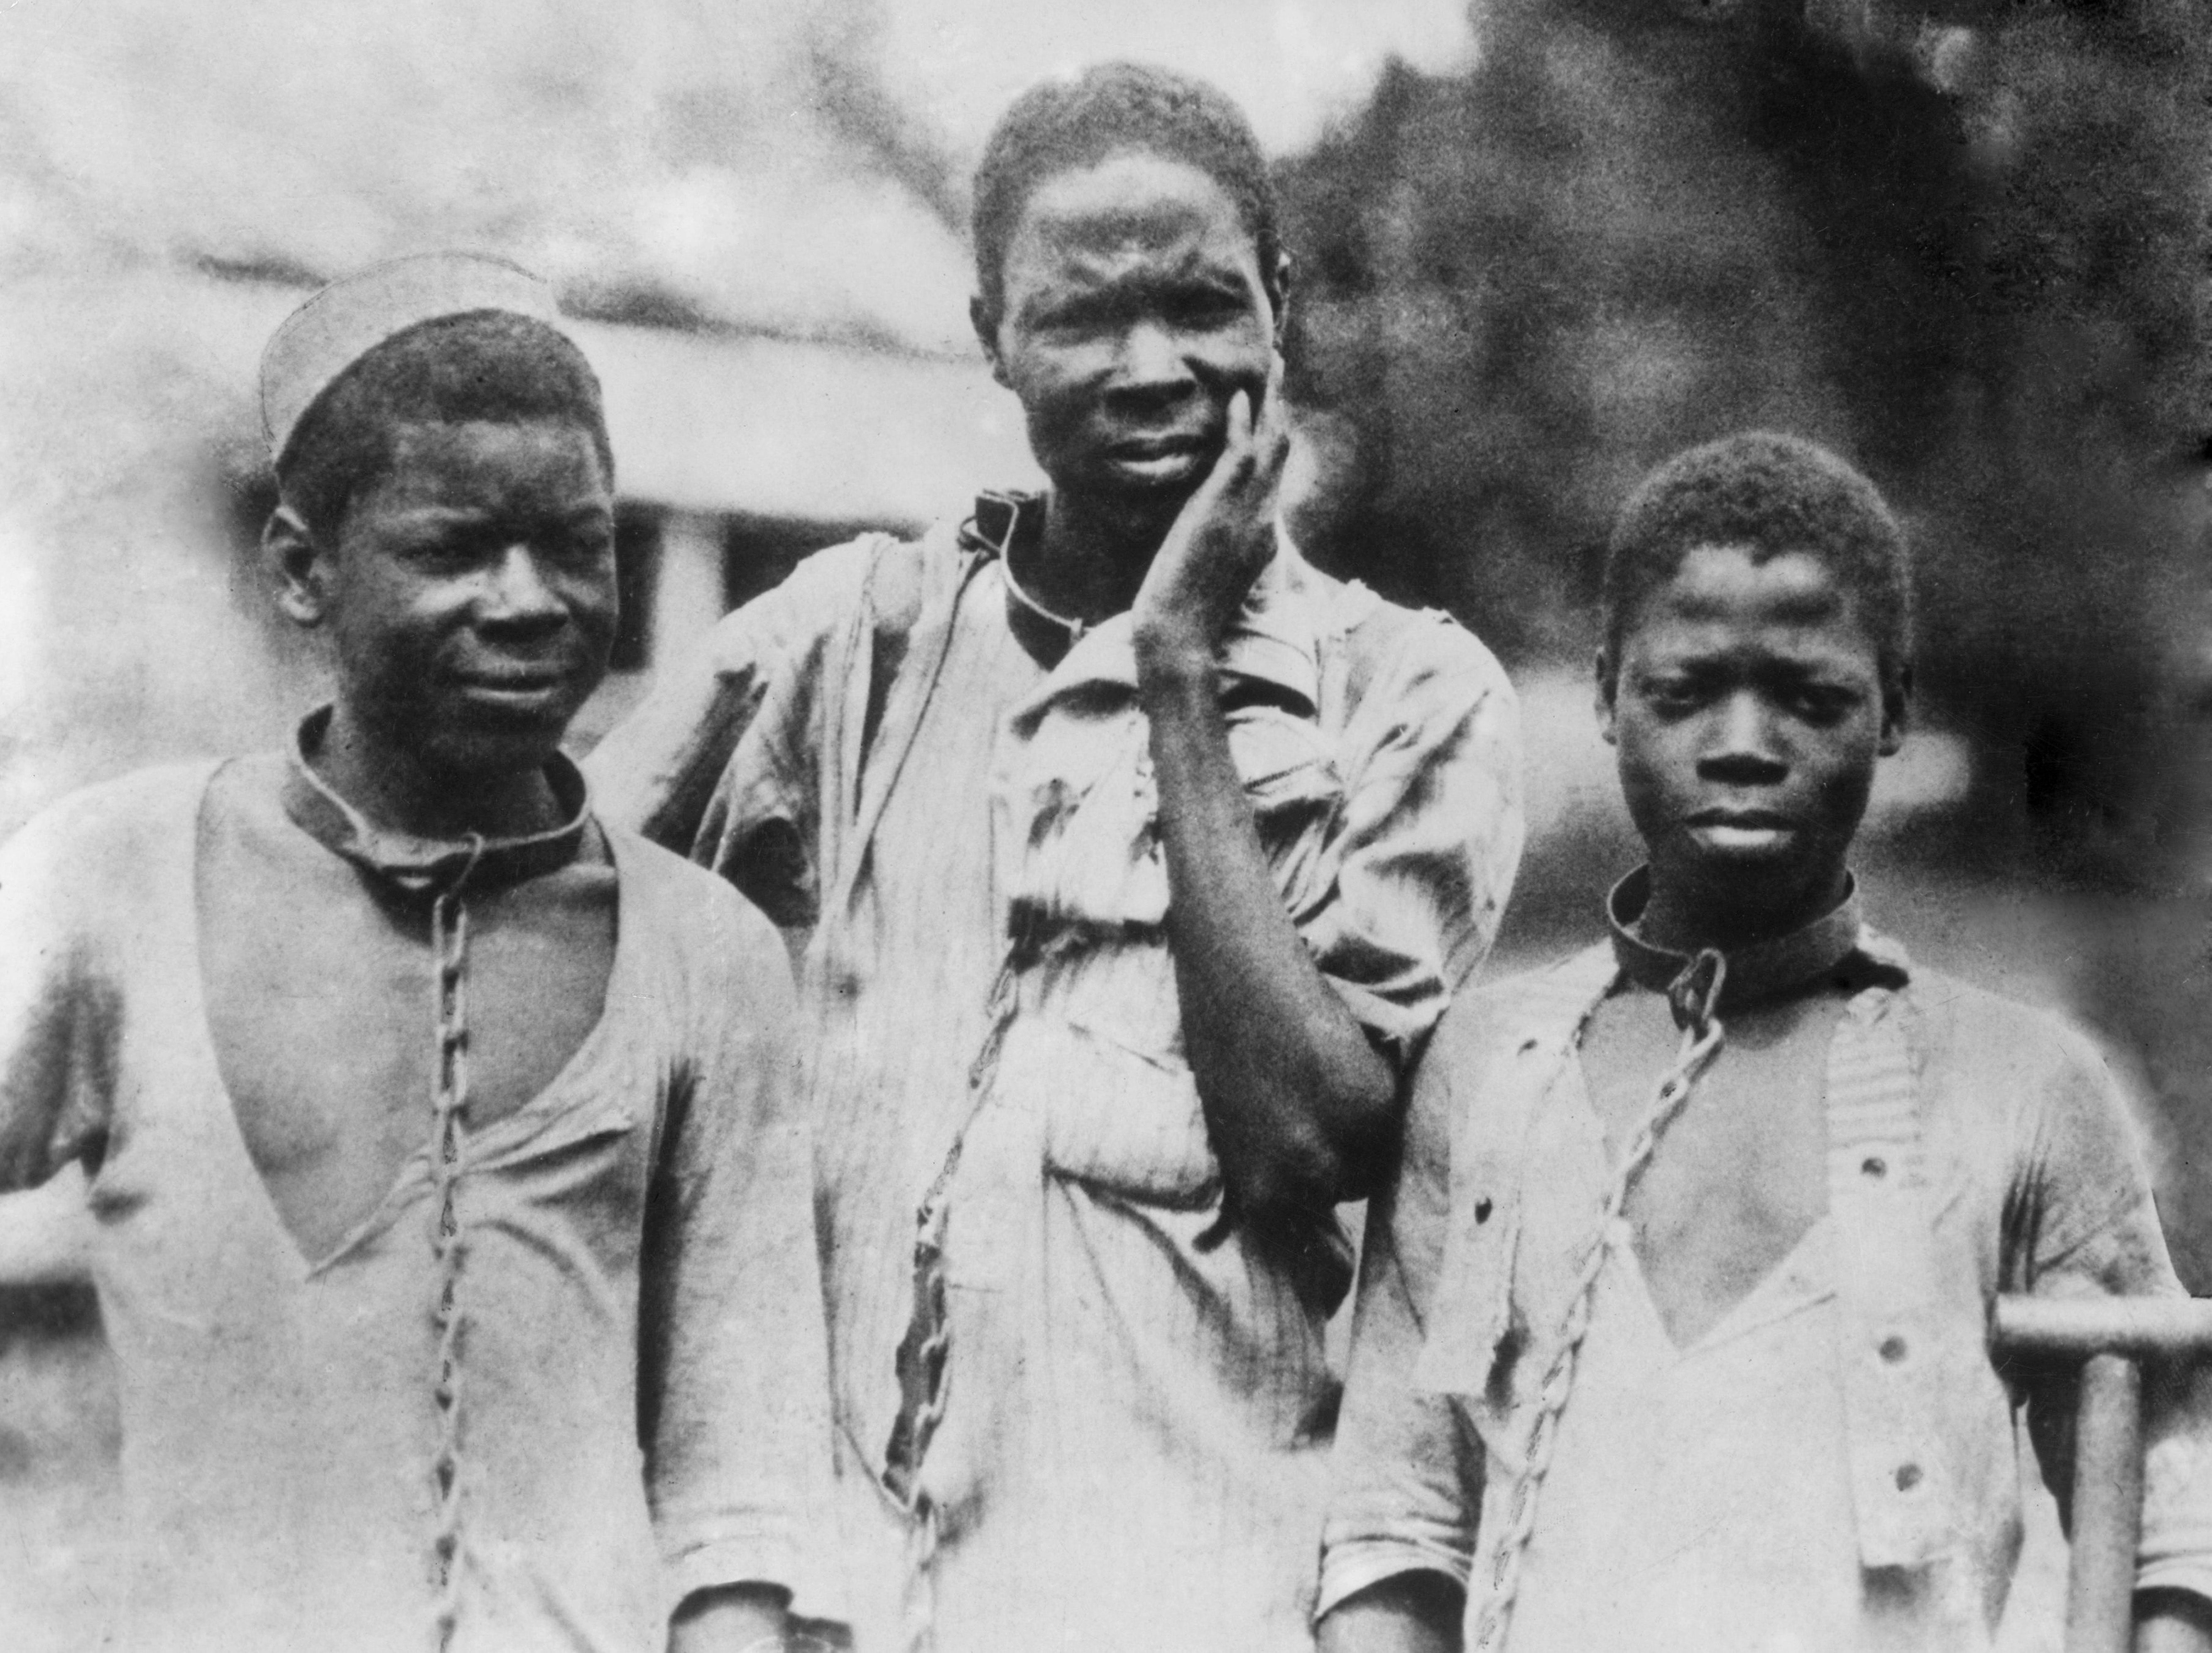 Three enslaved Black men from Ethiopia in iron collars and chains. Photograph taken around 1910